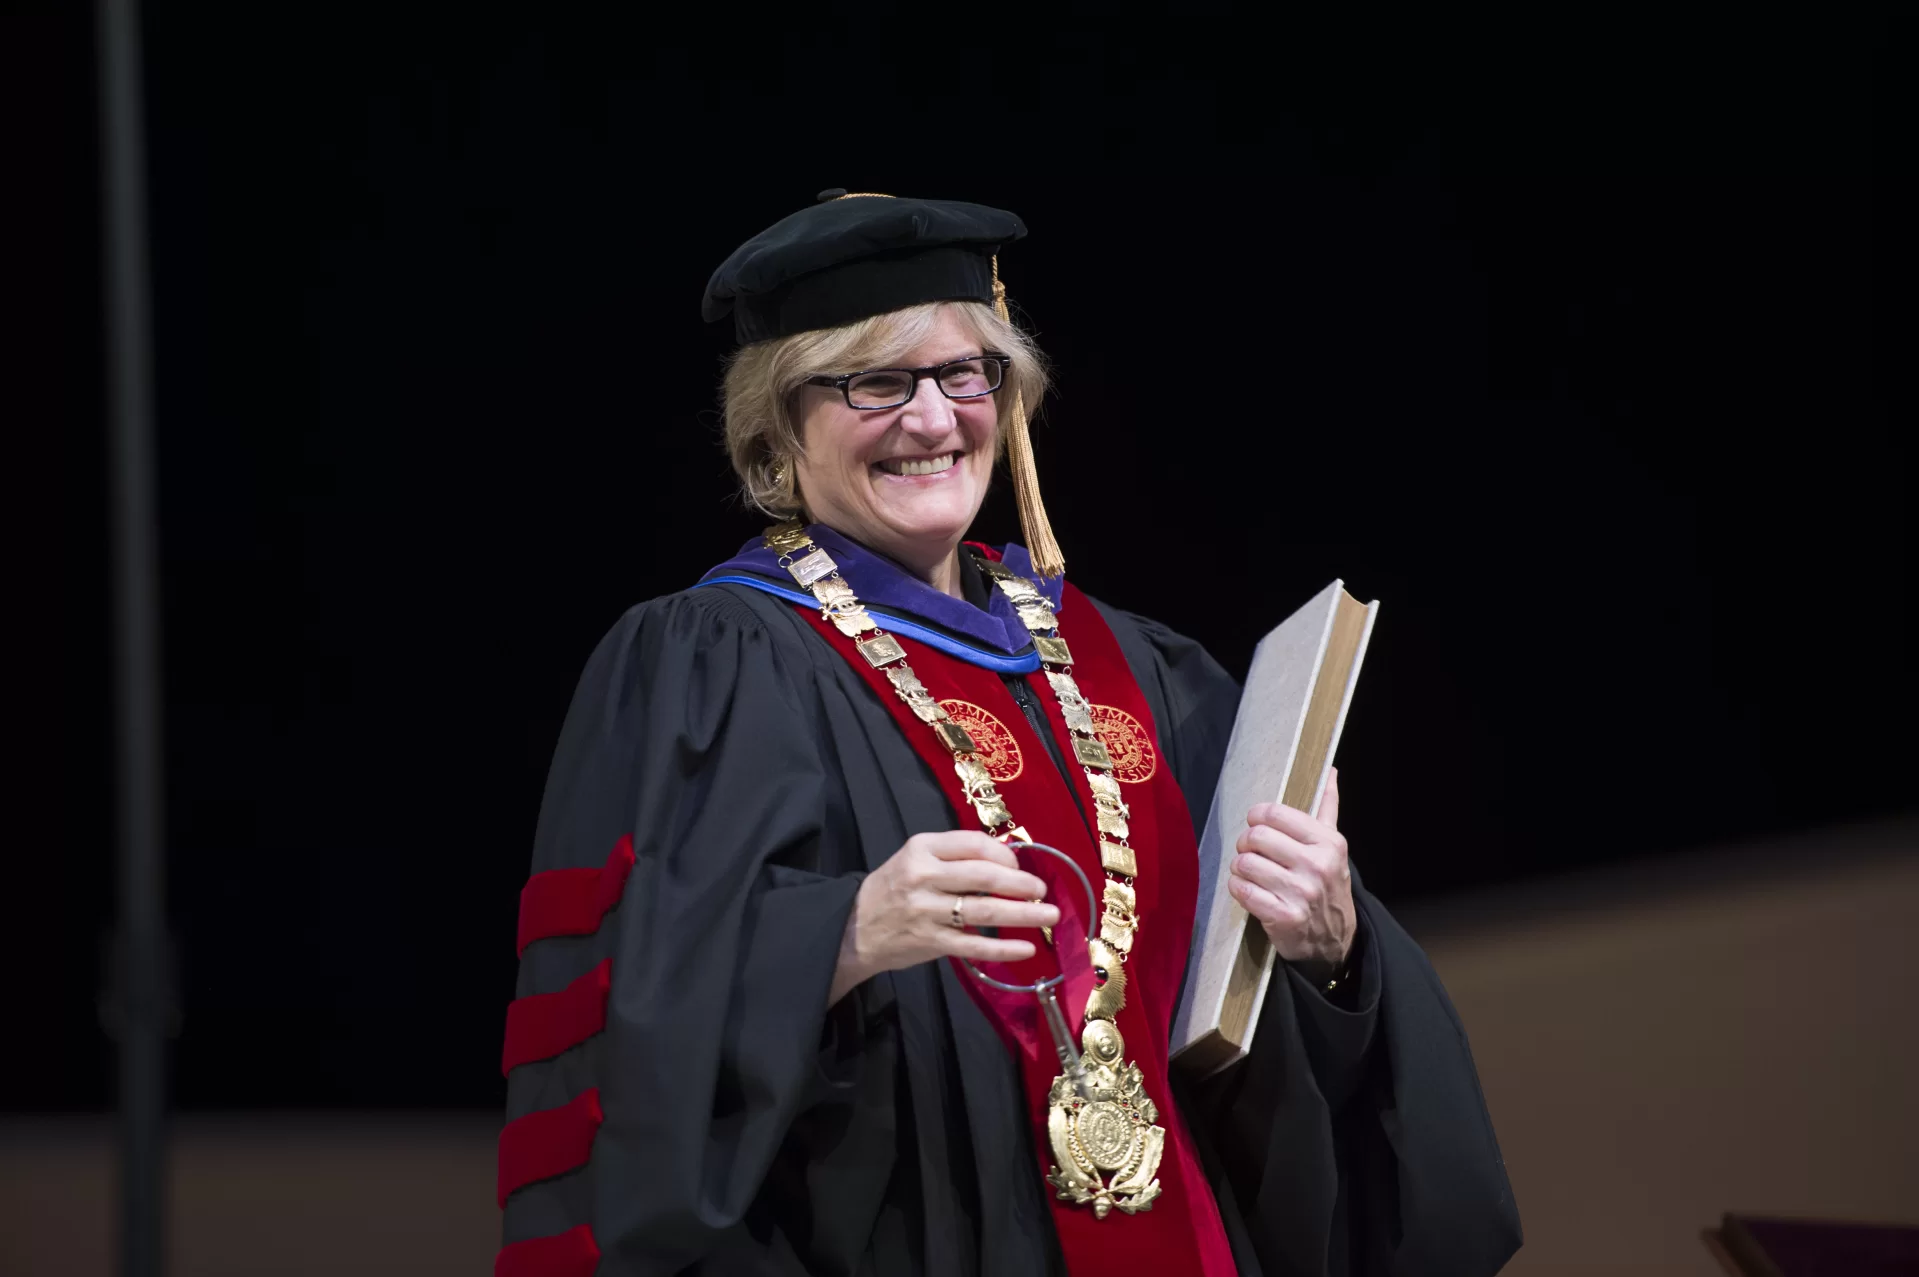 Clayton Spencer holds the symbols of office during her installation ceremony as the eighth president of Bates College on Friday, Oct. 26, 2012. The symbols are the keys, the presidential collar, and the record book.